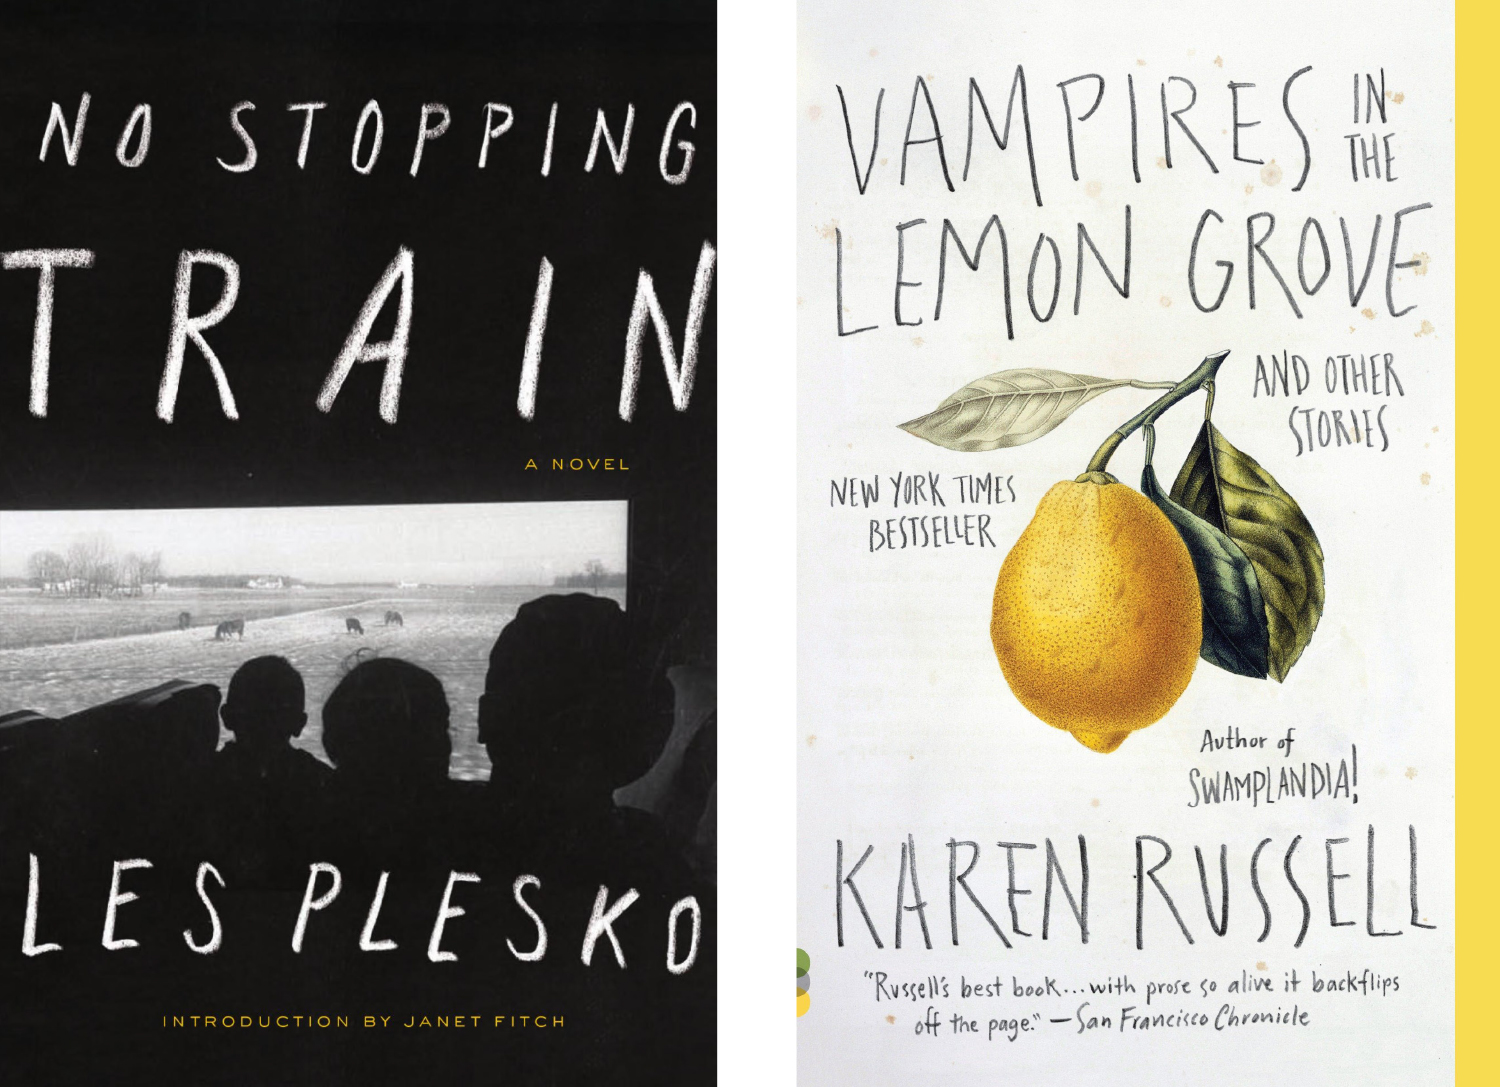 No Stopping Train and Vampires in the Lemon Grove covers